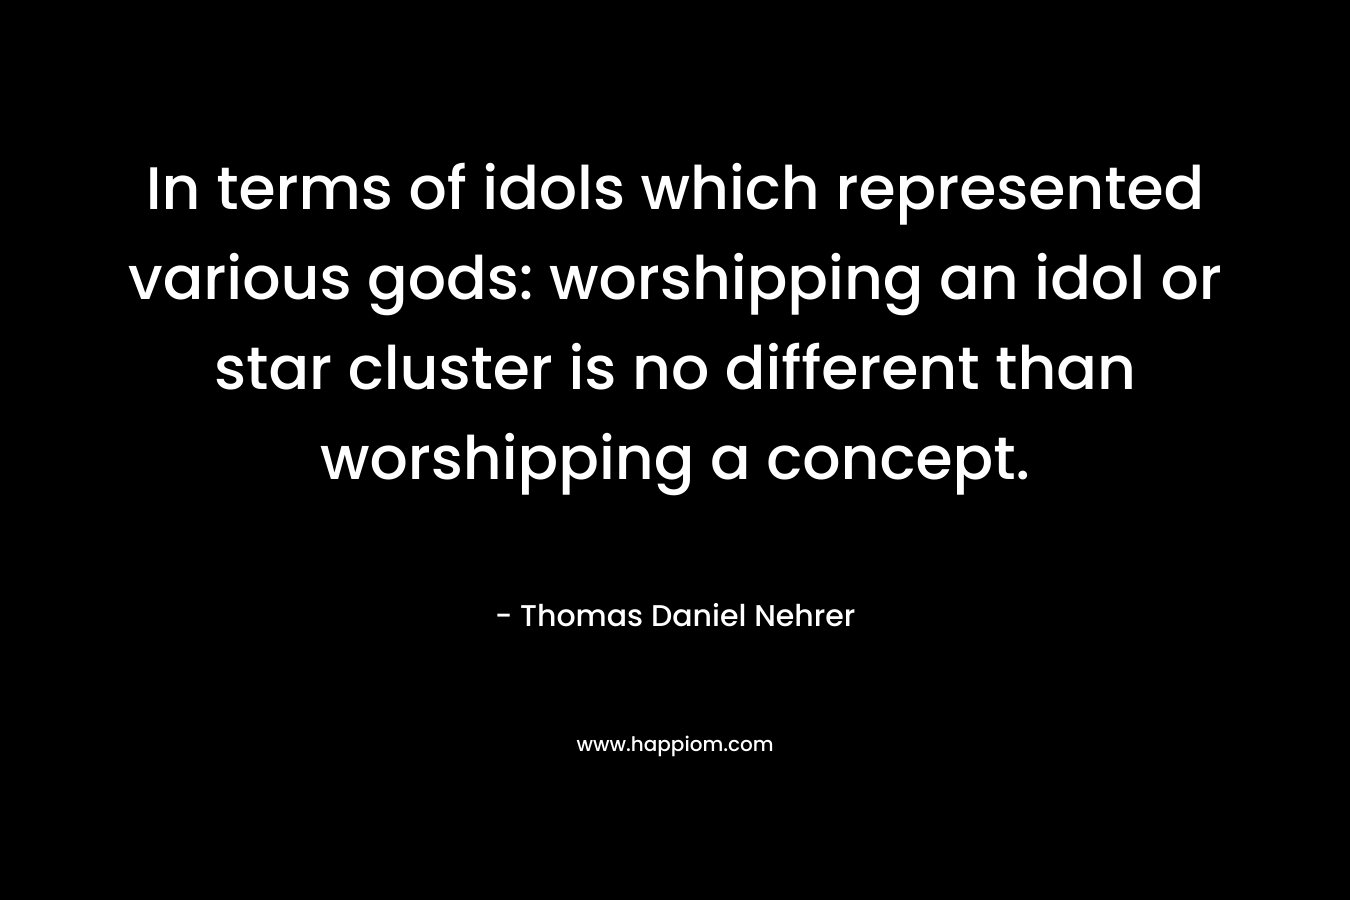 In terms of idols which represented various gods: worshipping an idol or star cluster is no different than worshipping a concept. – Thomas Daniel Nehrer